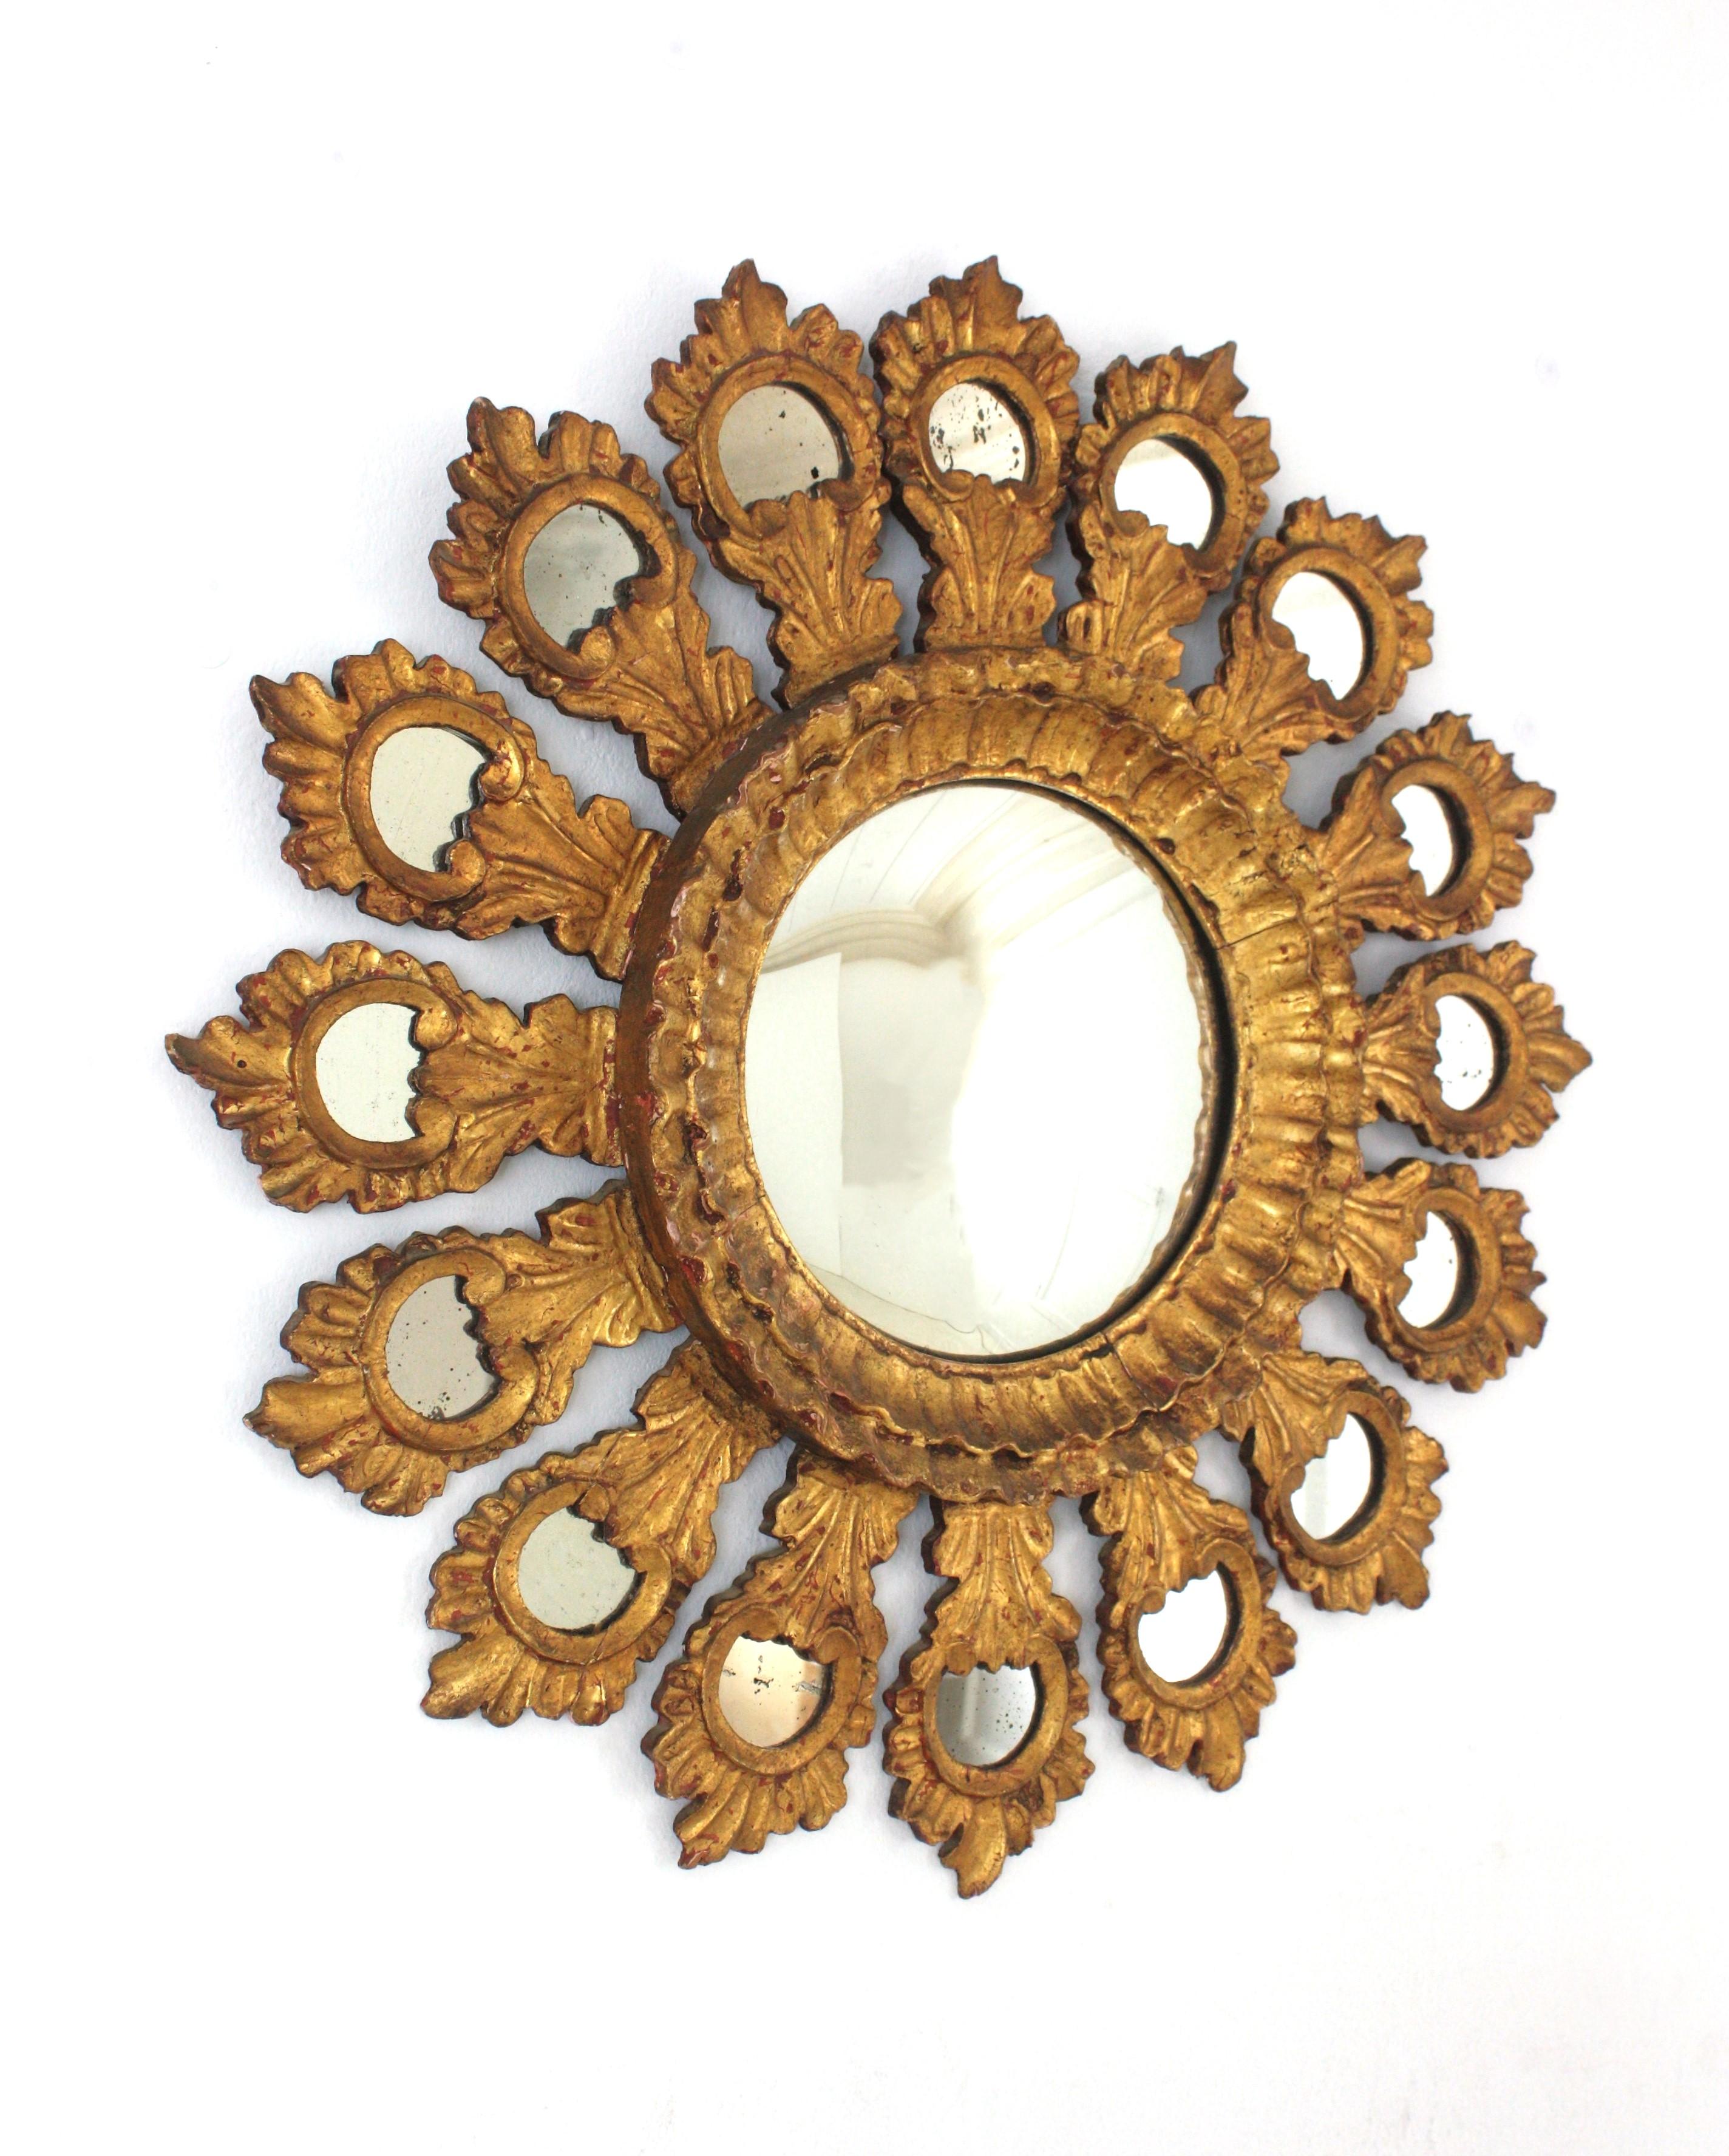 Gold Leaf Giltwood Sunburst Convex Mirror with Mirror Inlays, Spain, 1930s-1940s.
One of a Kind Hand Carved Giltwood Sunburst Mirror with convex glass.
Rare find.
This wall mirror features a heavily carved giltwood frame made of a layer of foliage